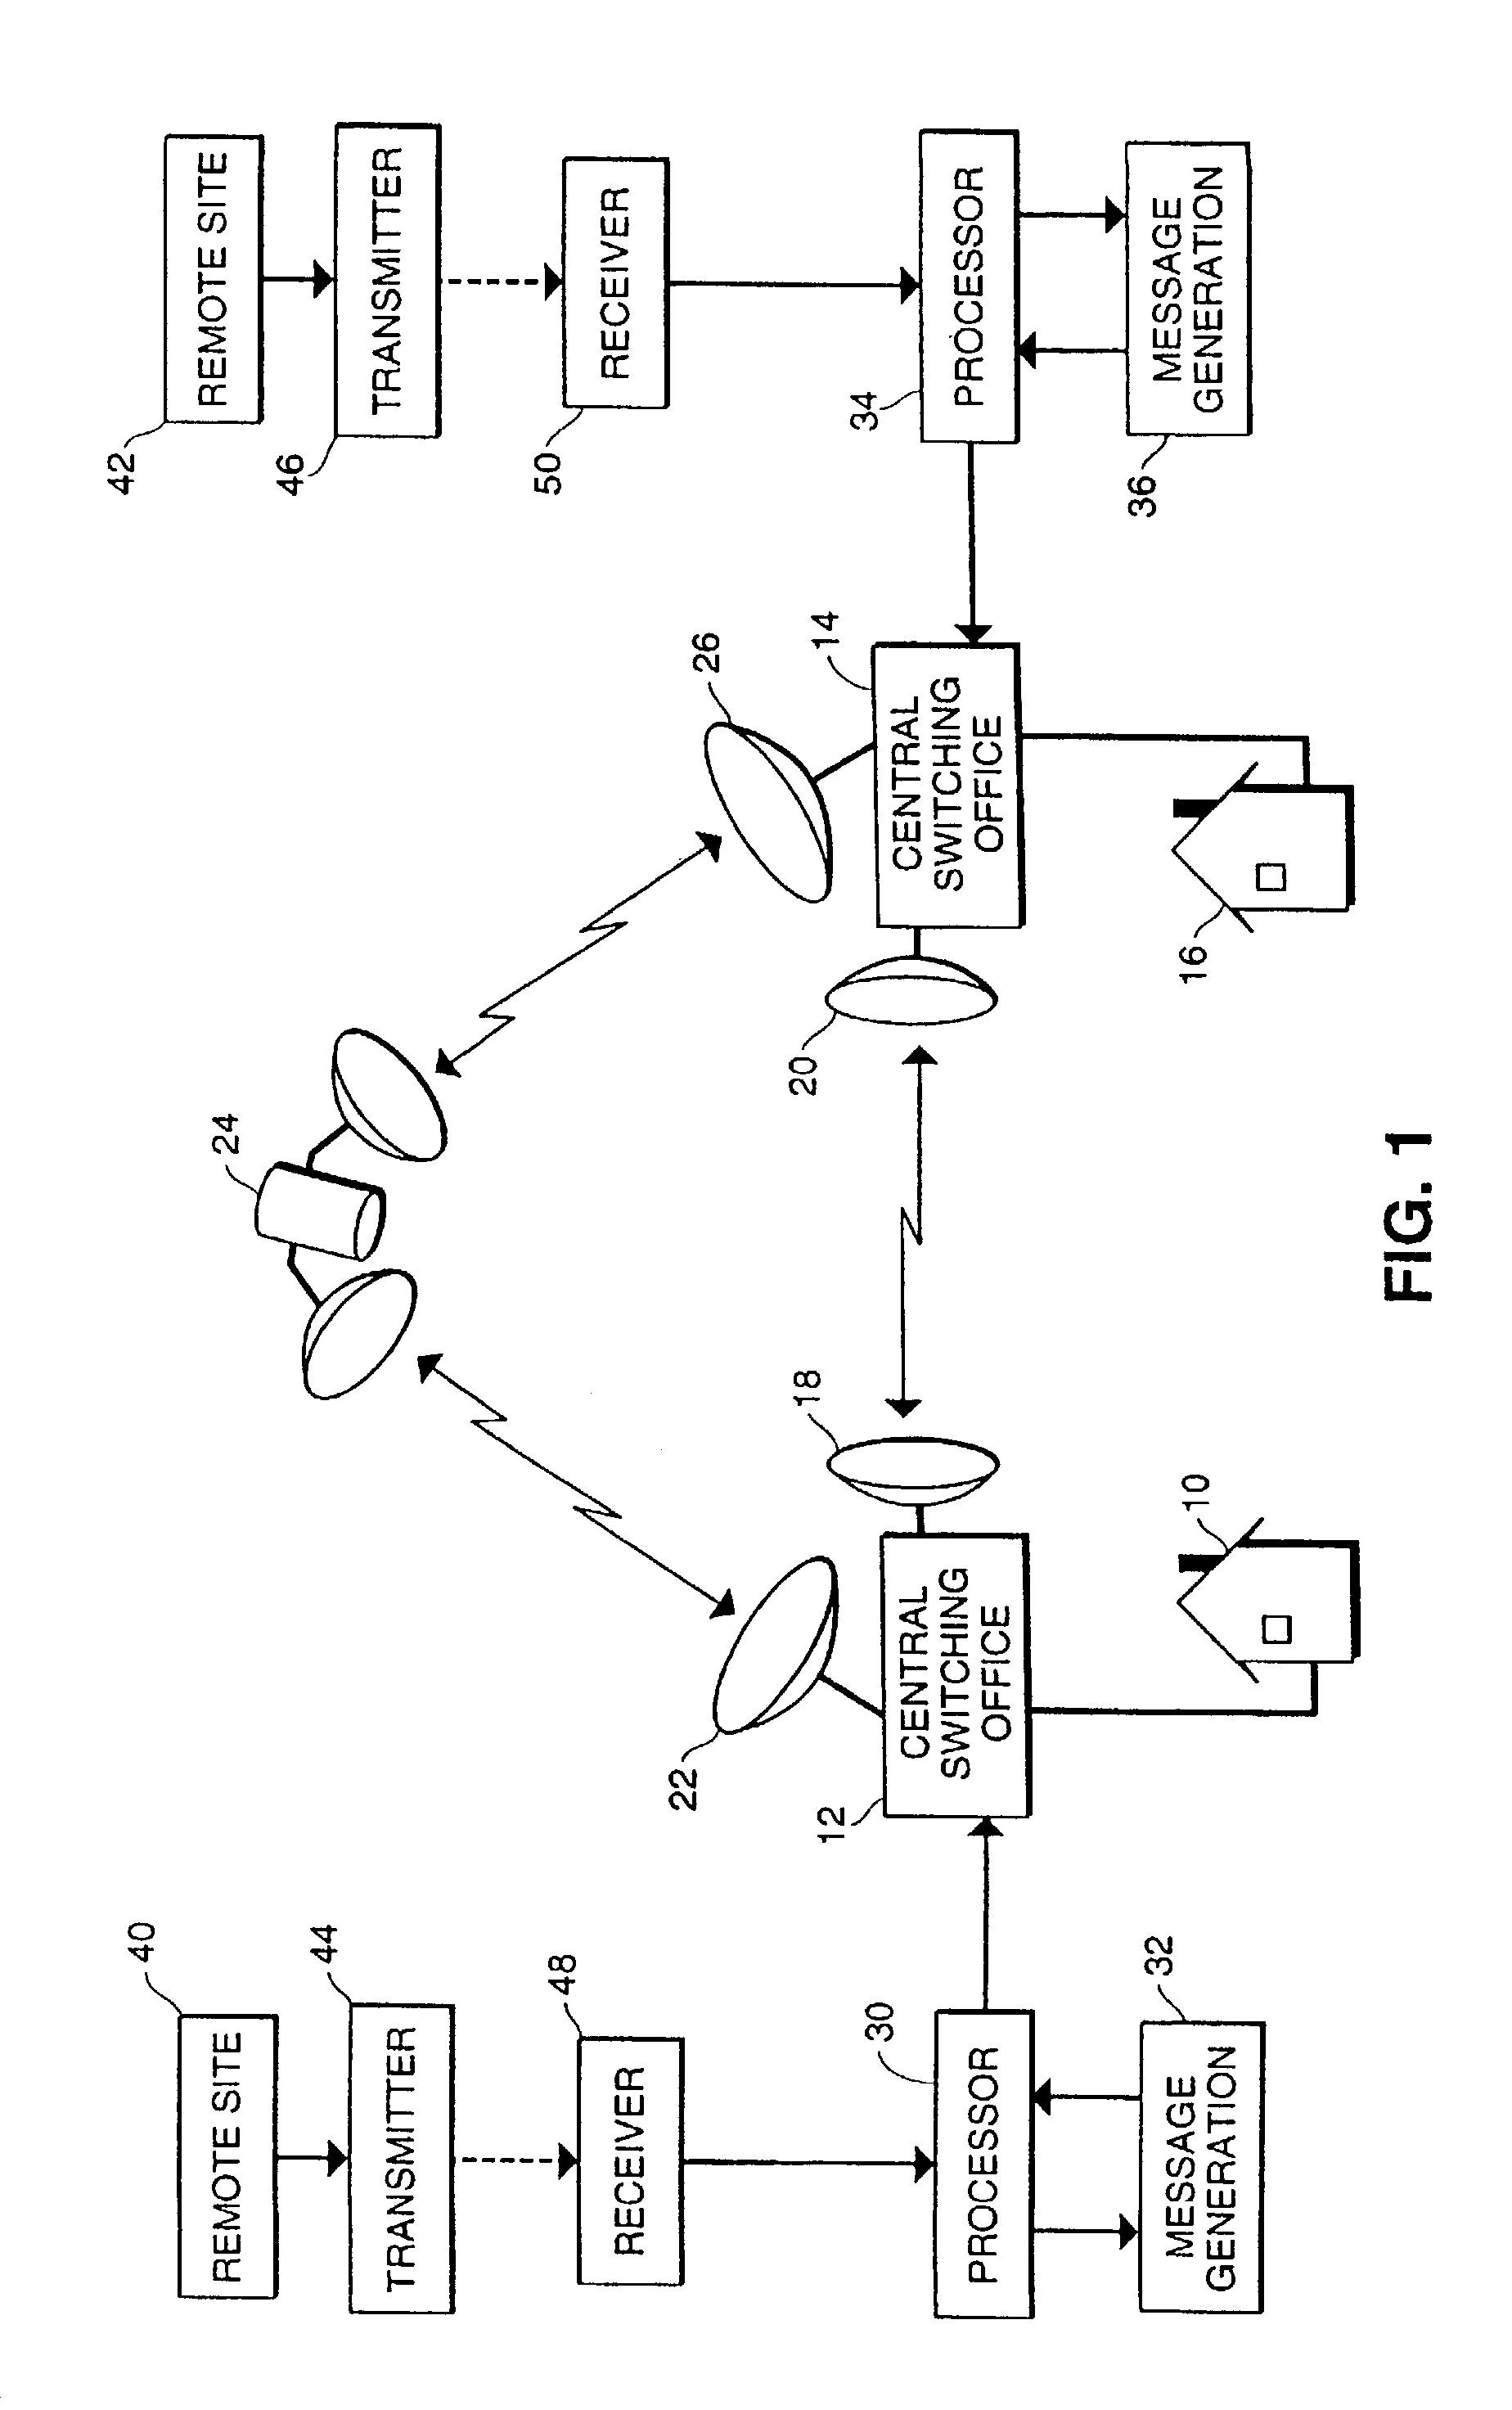 Telecommunication system using message presentation during a ringing signal period